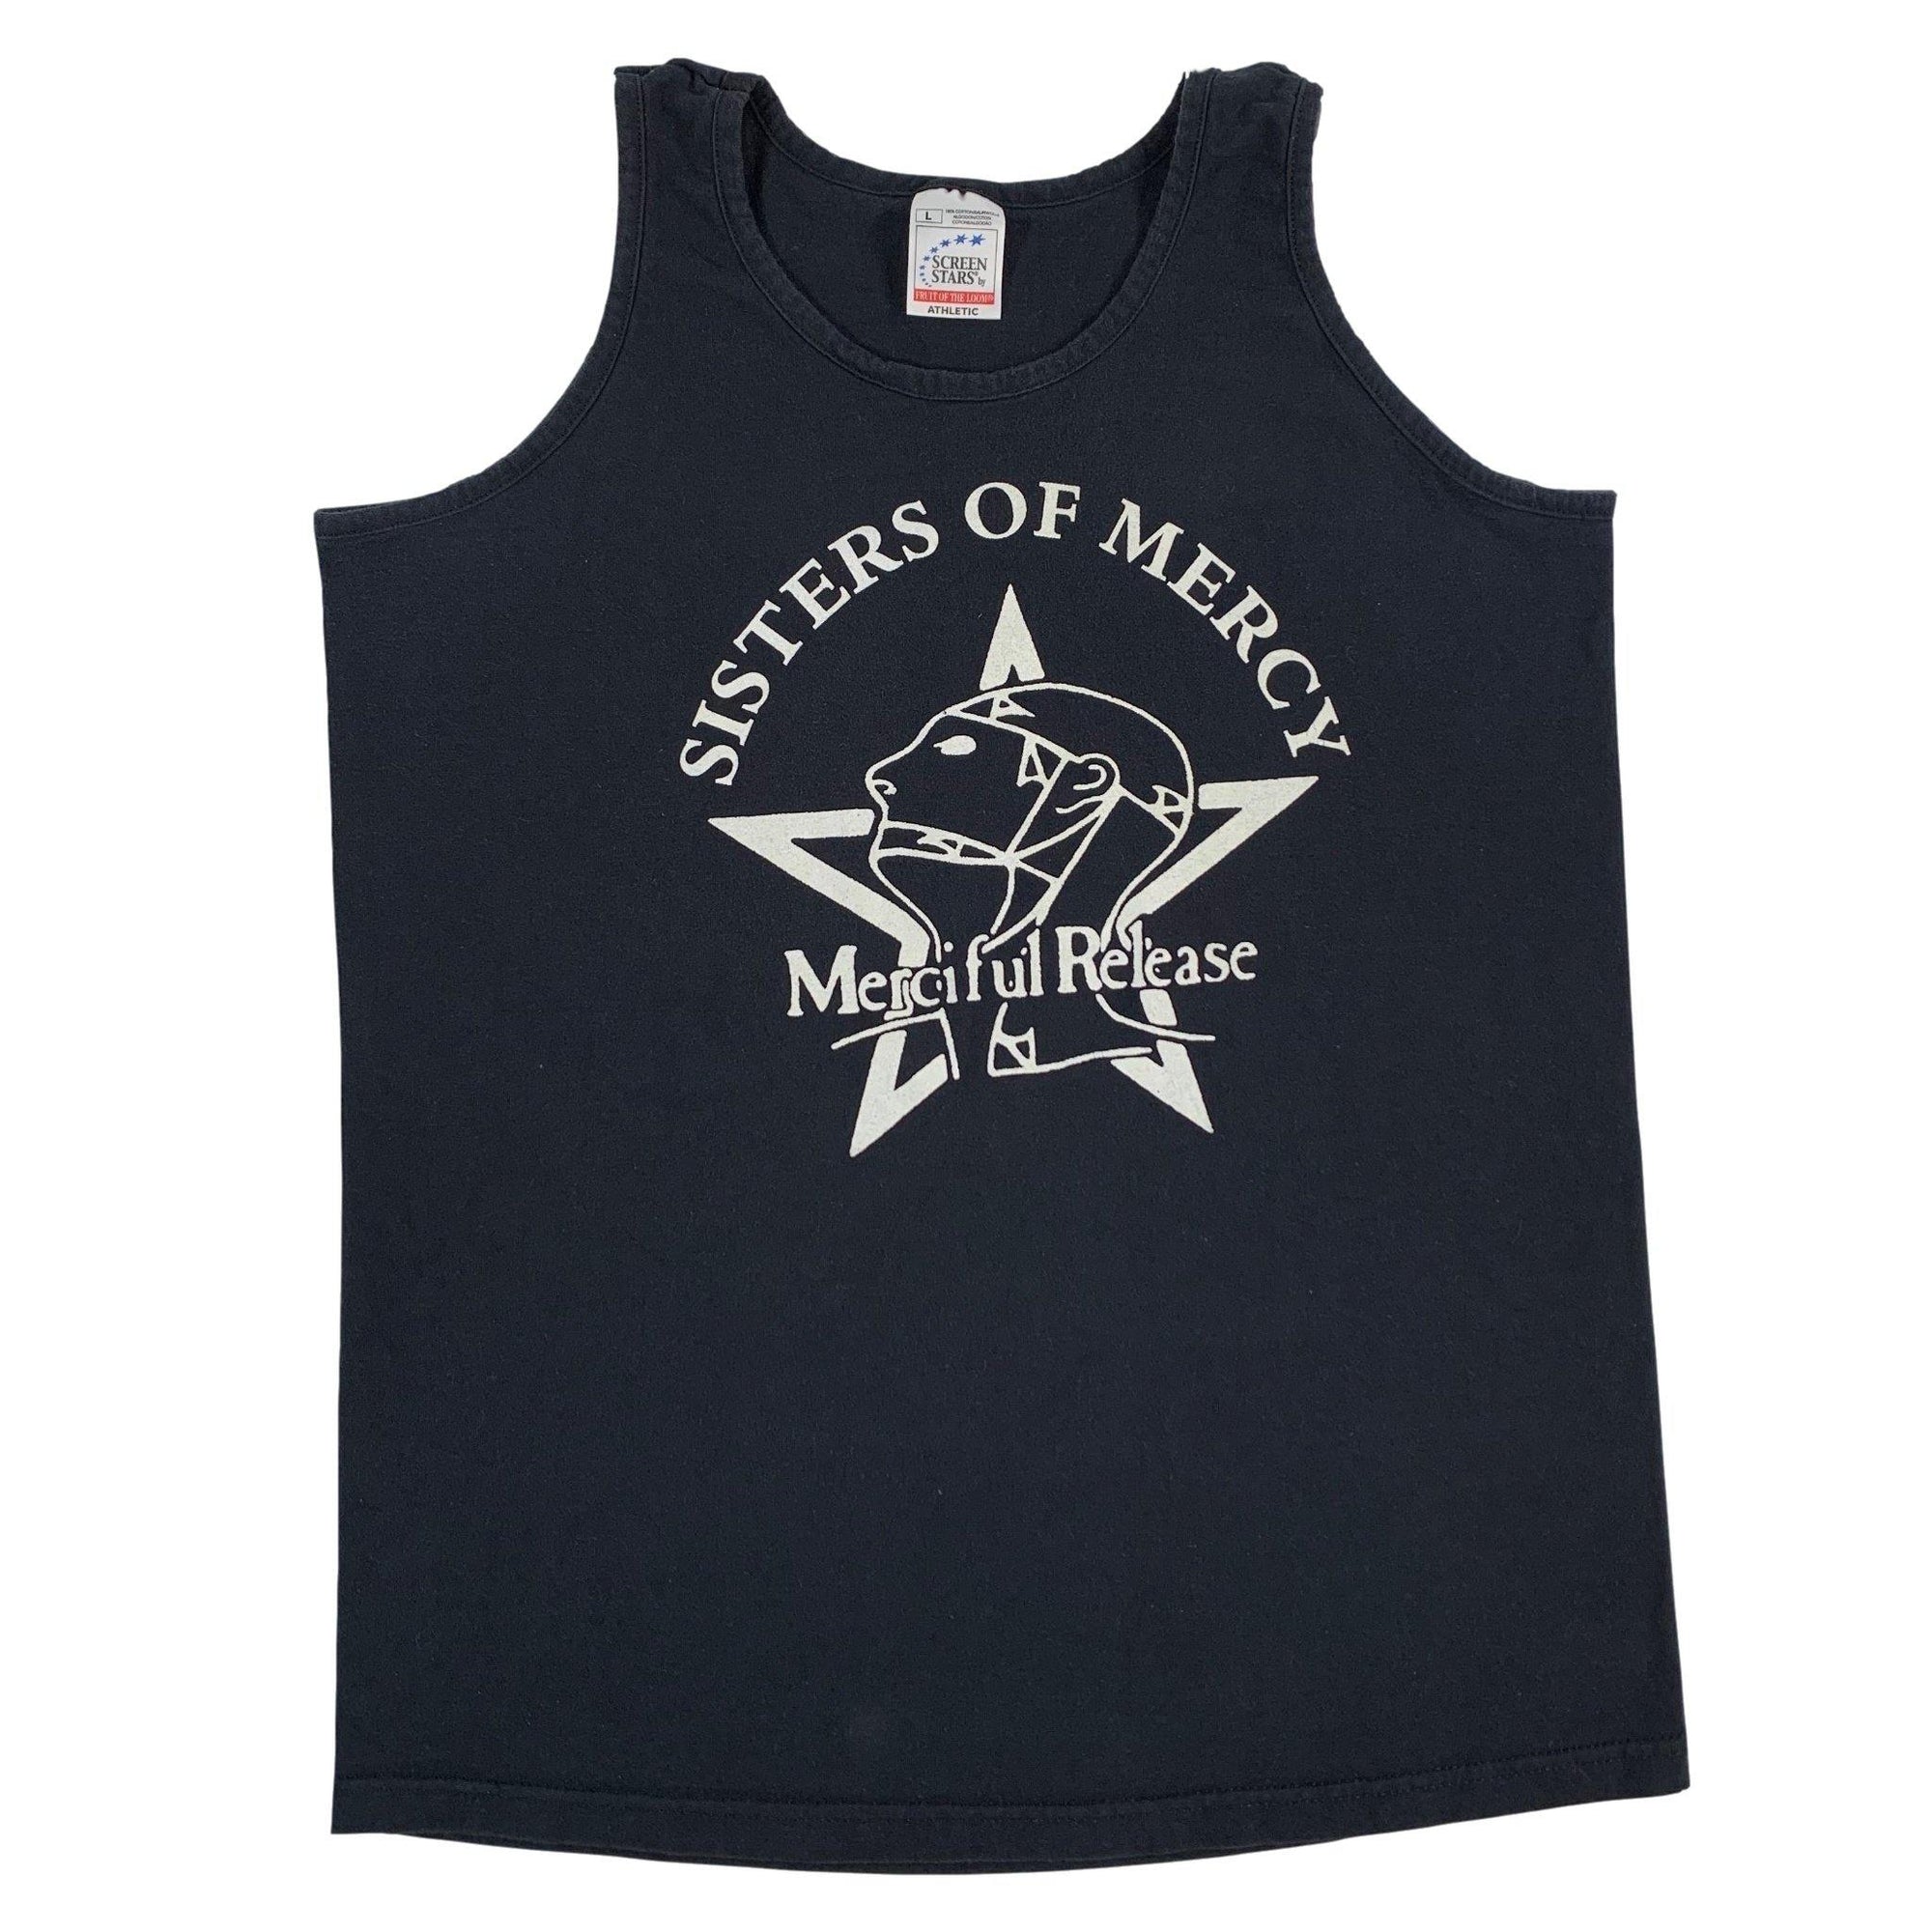 Vintage The Sisters Of Mercy "Merciful Release" Tank Top - jointcustodydc